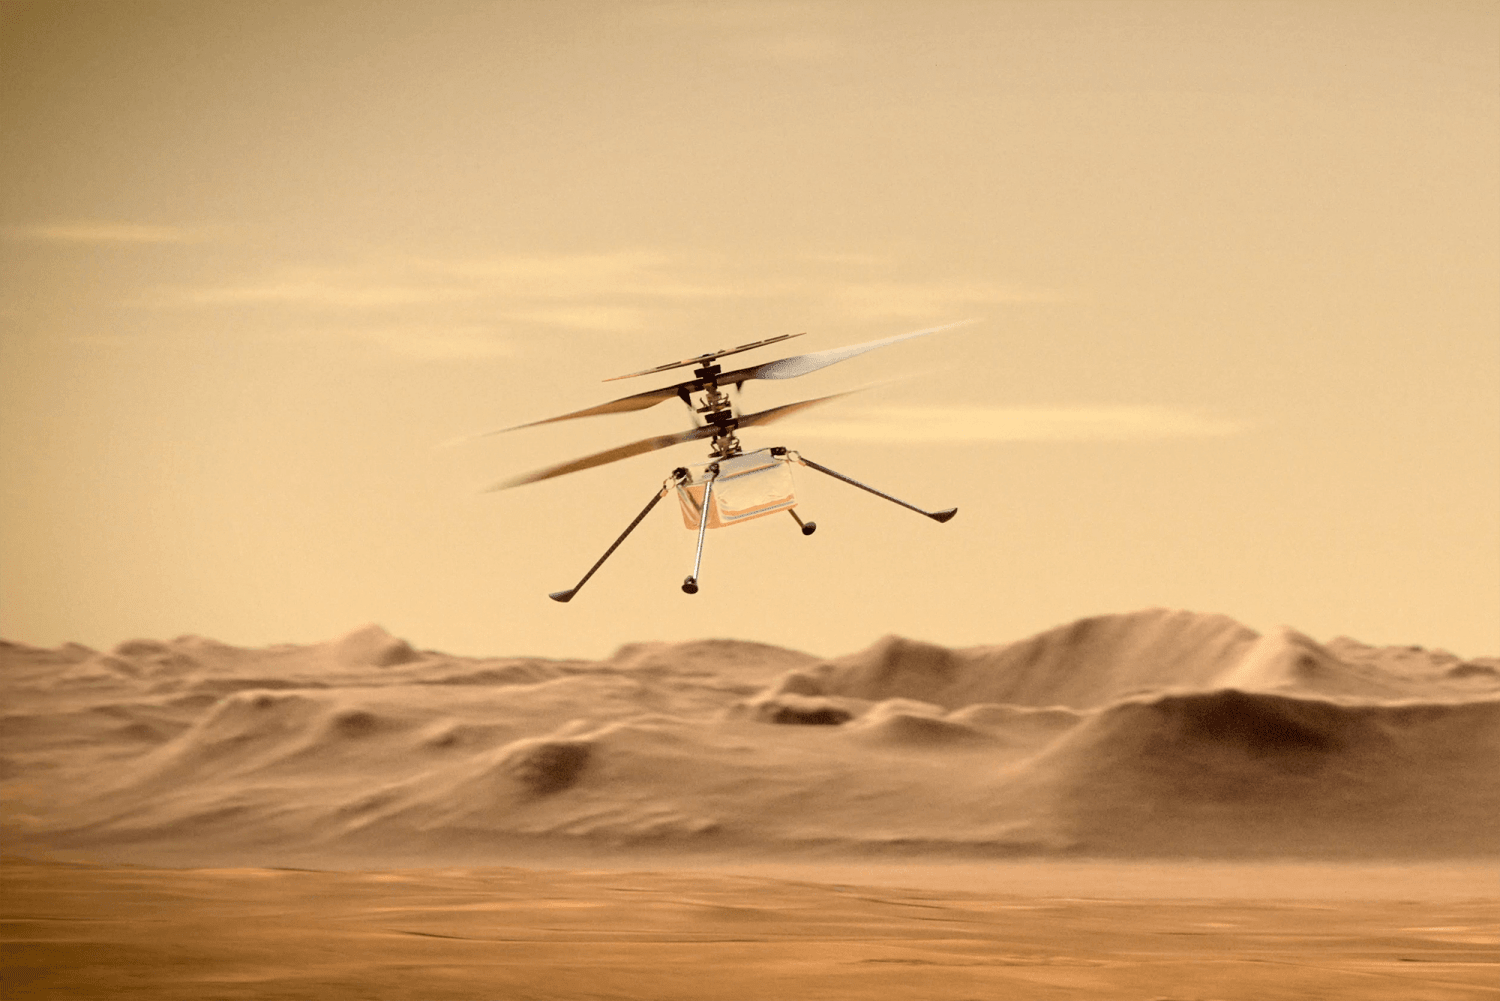 Mars Helicopter Survives Malfunction During Sixth Flight